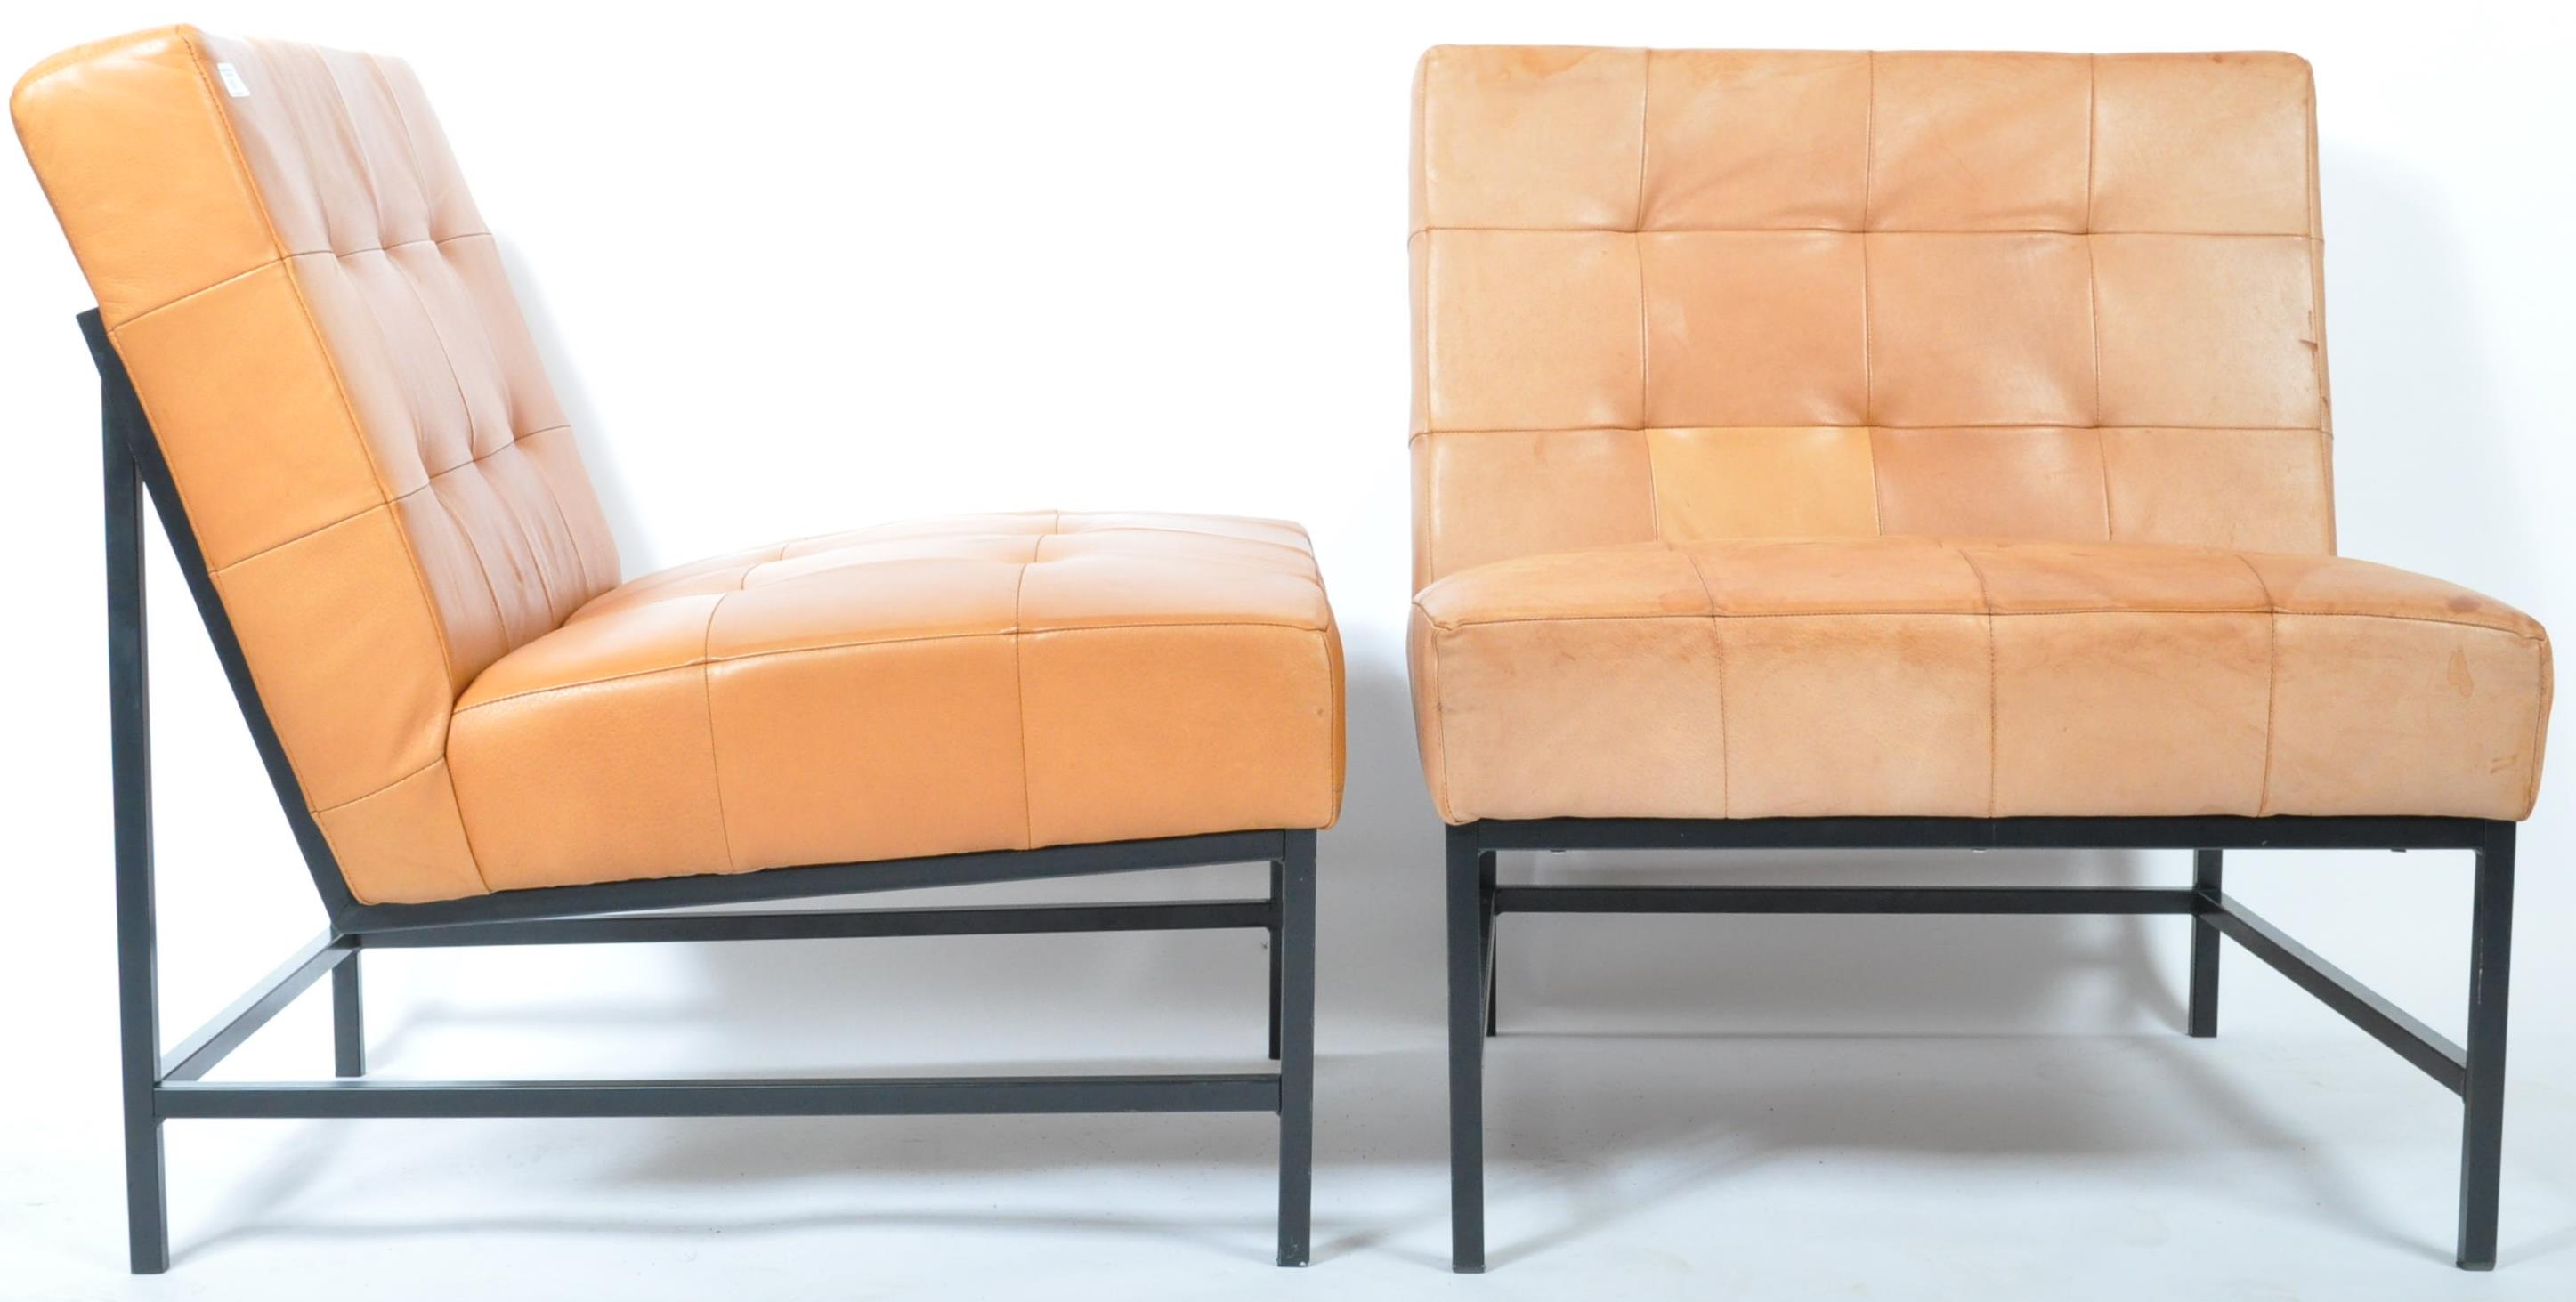 PAIR OF LATE 20TH CENTURY CARAMEL EASY LOUNGE CHAIRS - Image 5 of 8